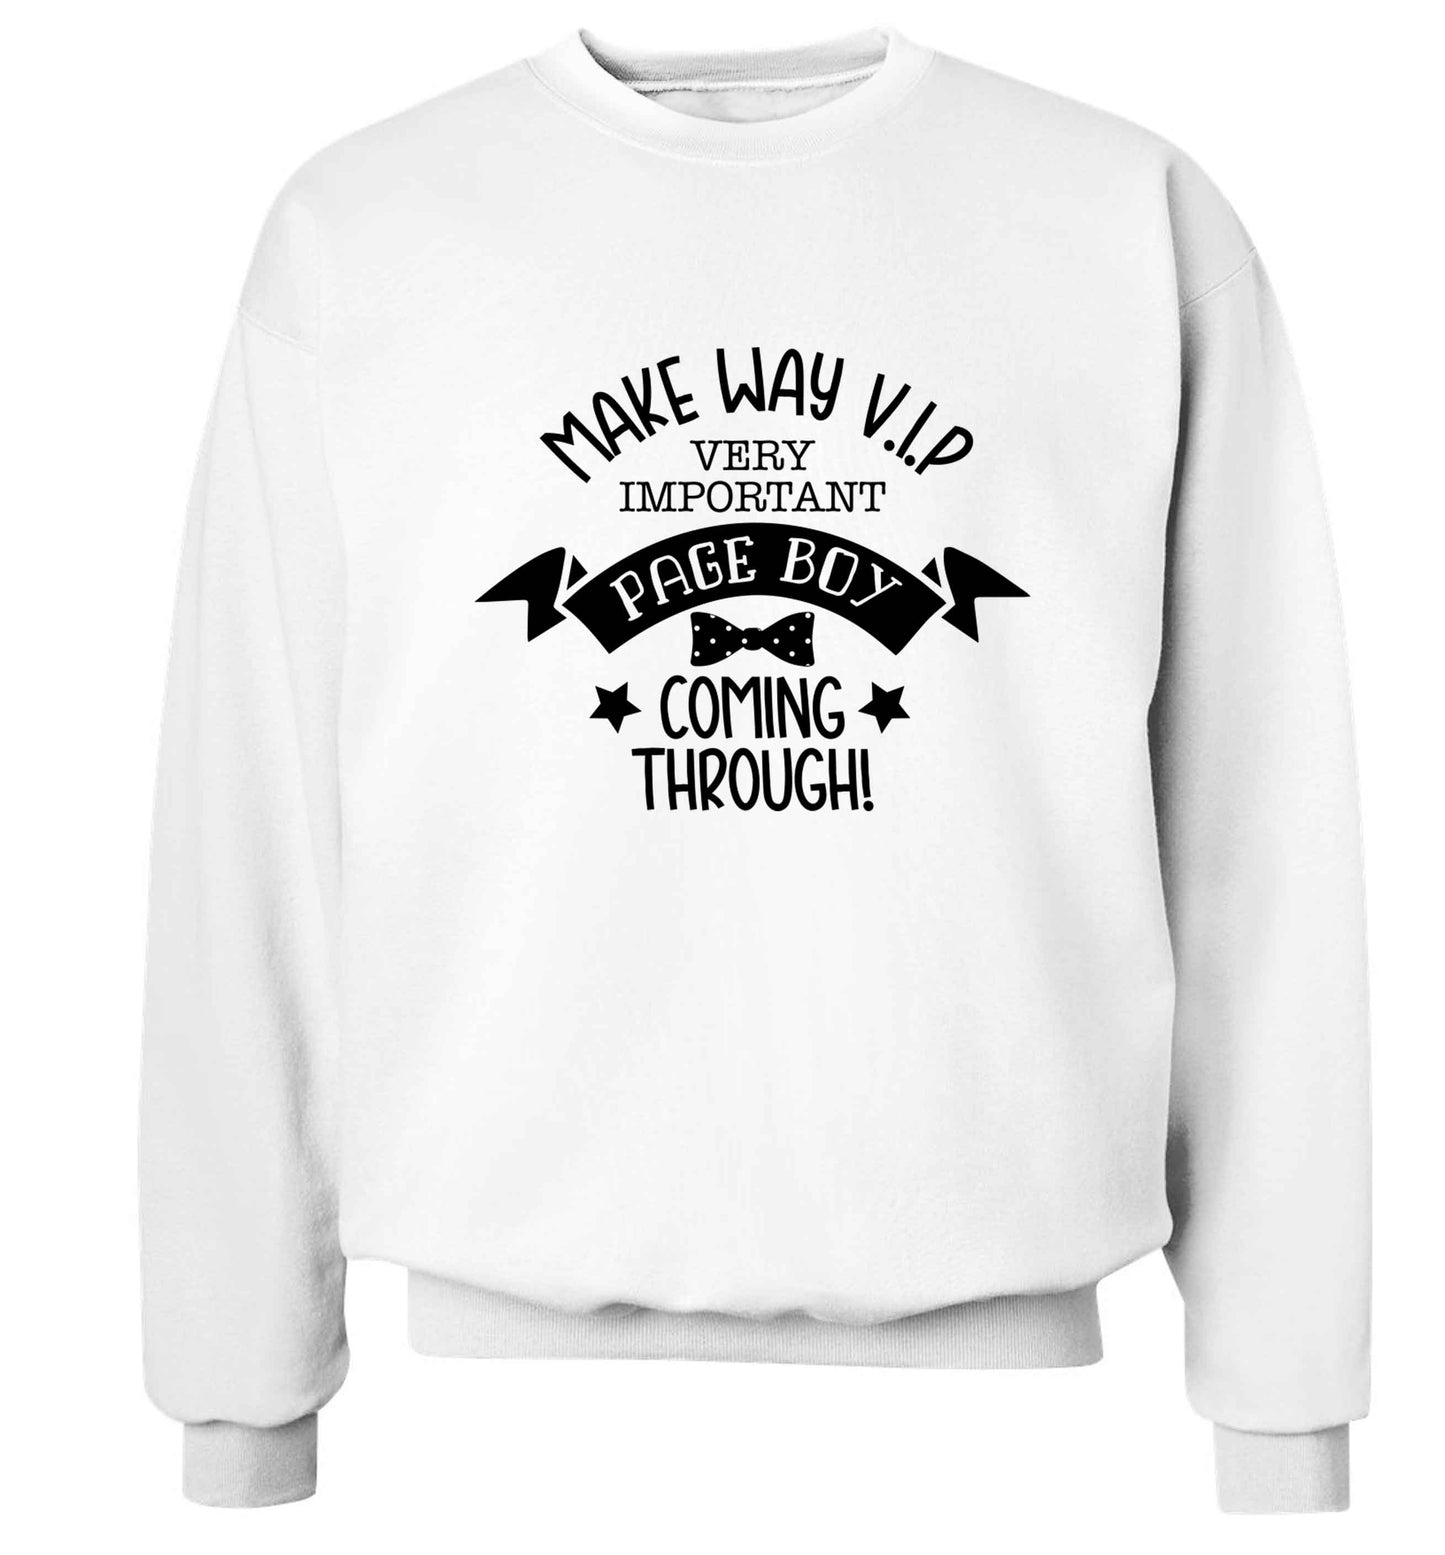 Make way V.I.P page boy coming through! Adult's unisex white Sweater 2XL